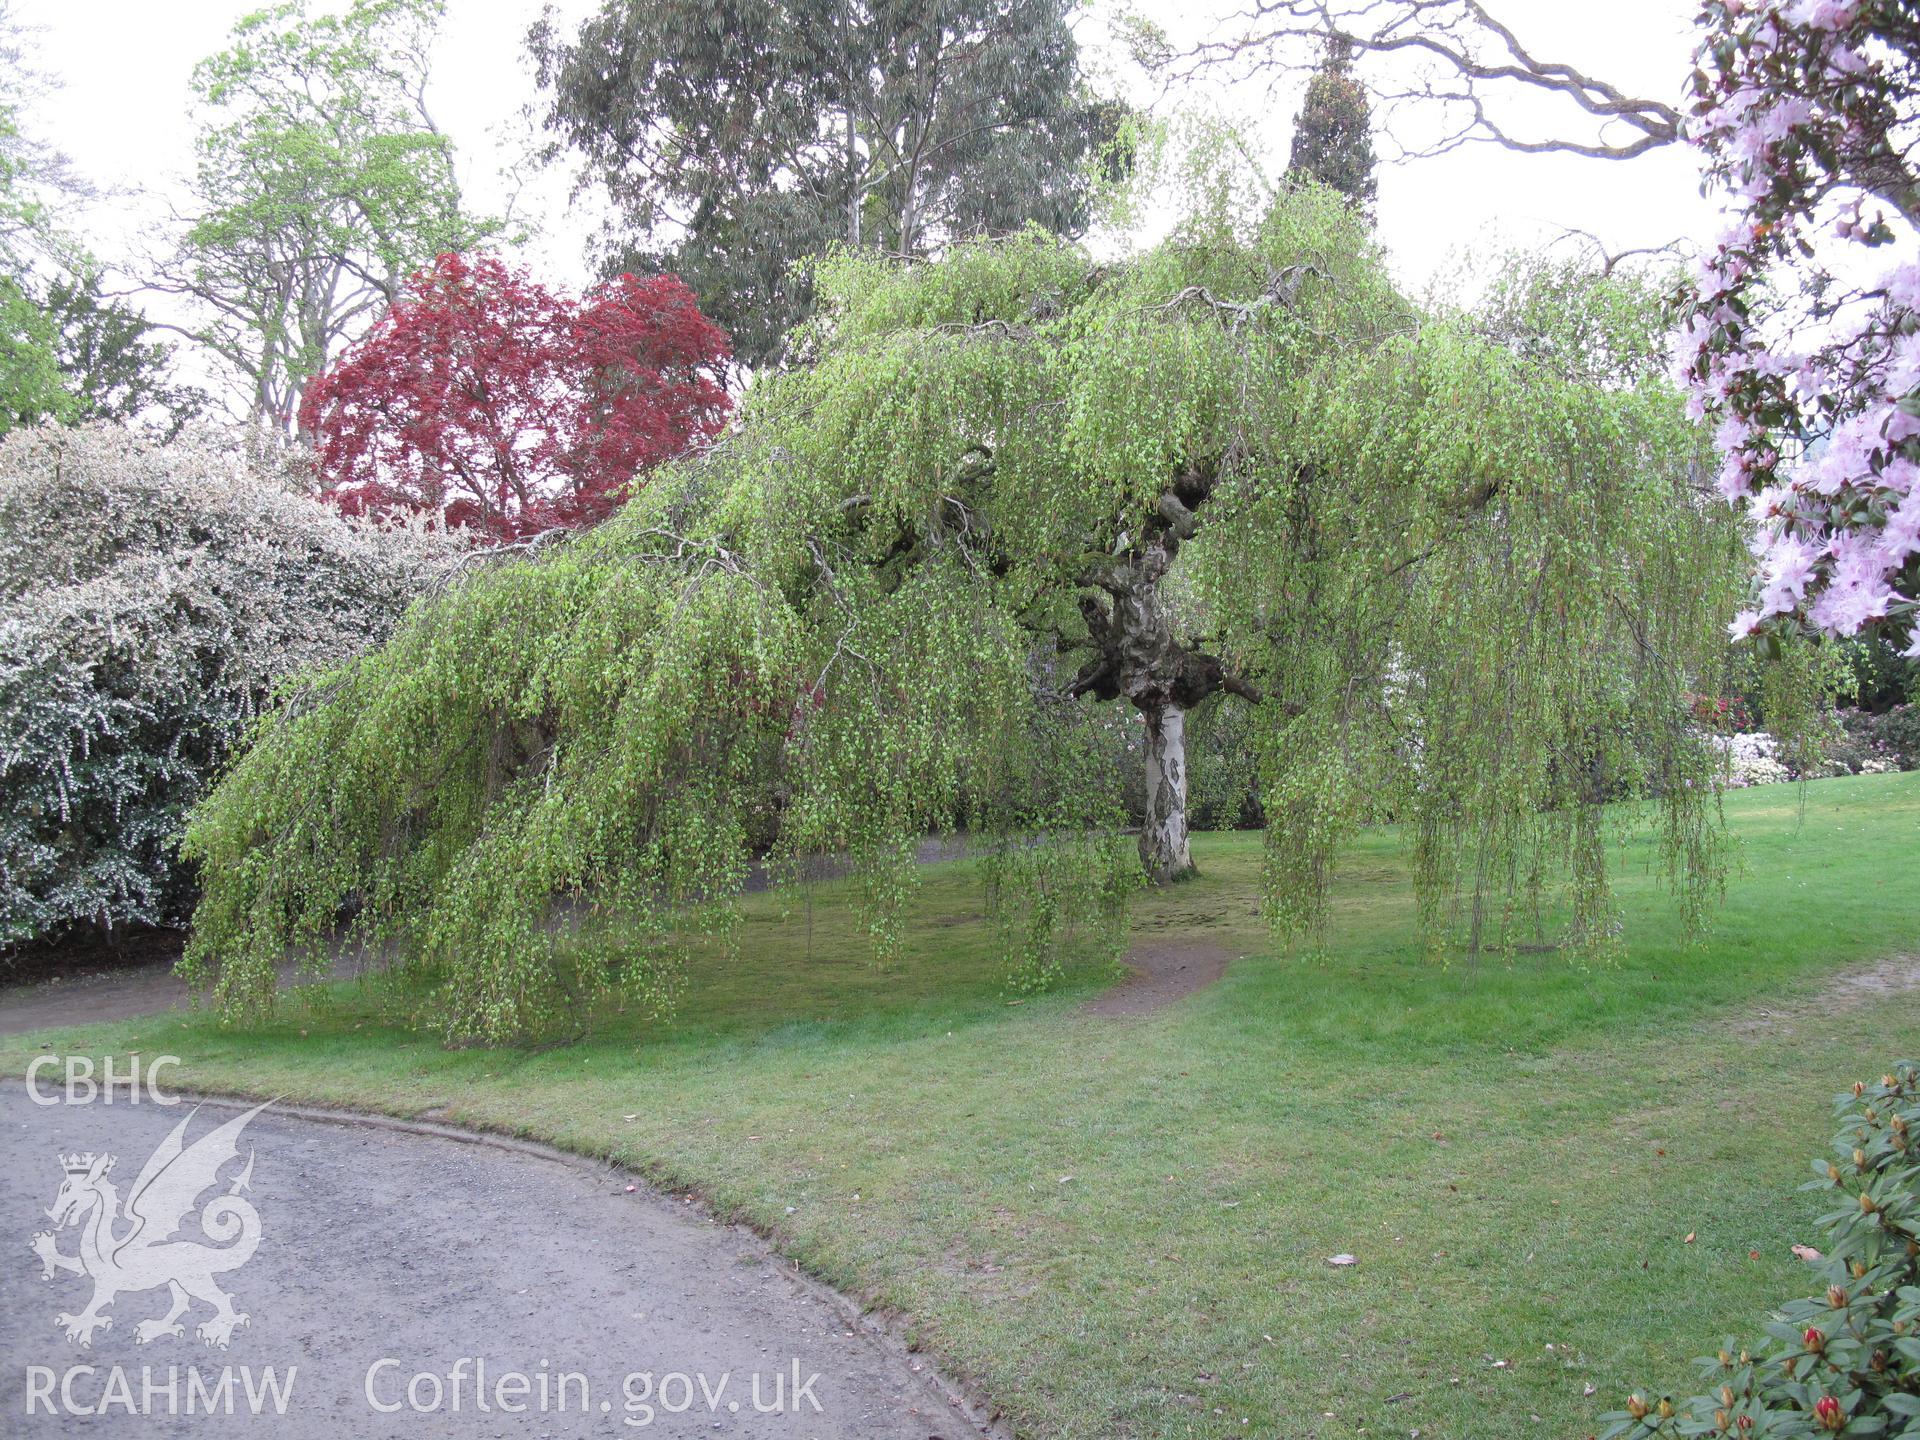 Betula Pendula Youngii (Weeping Silver Birch) at the south end of the main lawn.